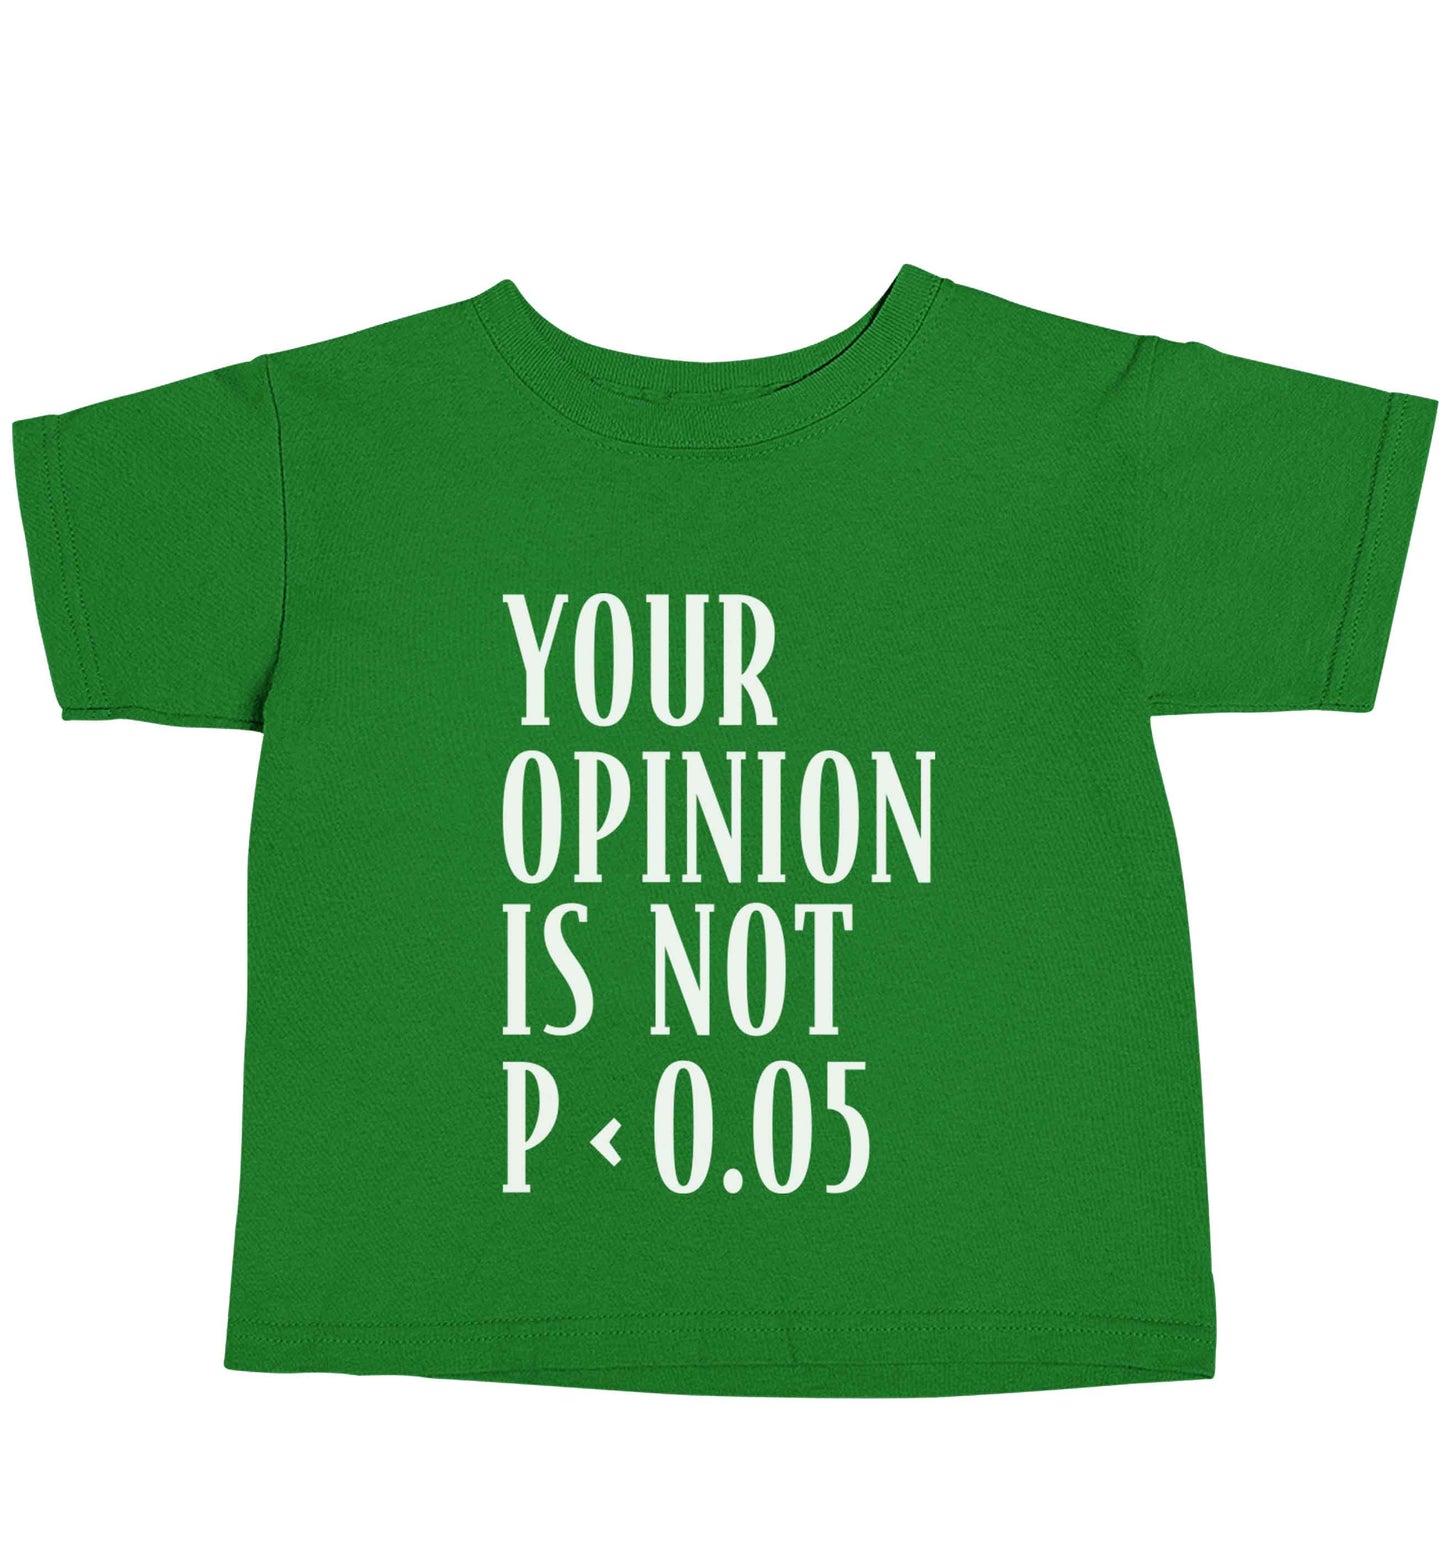 Your opinion is not P < 0.05green baby toddler Tshirt 2 Years